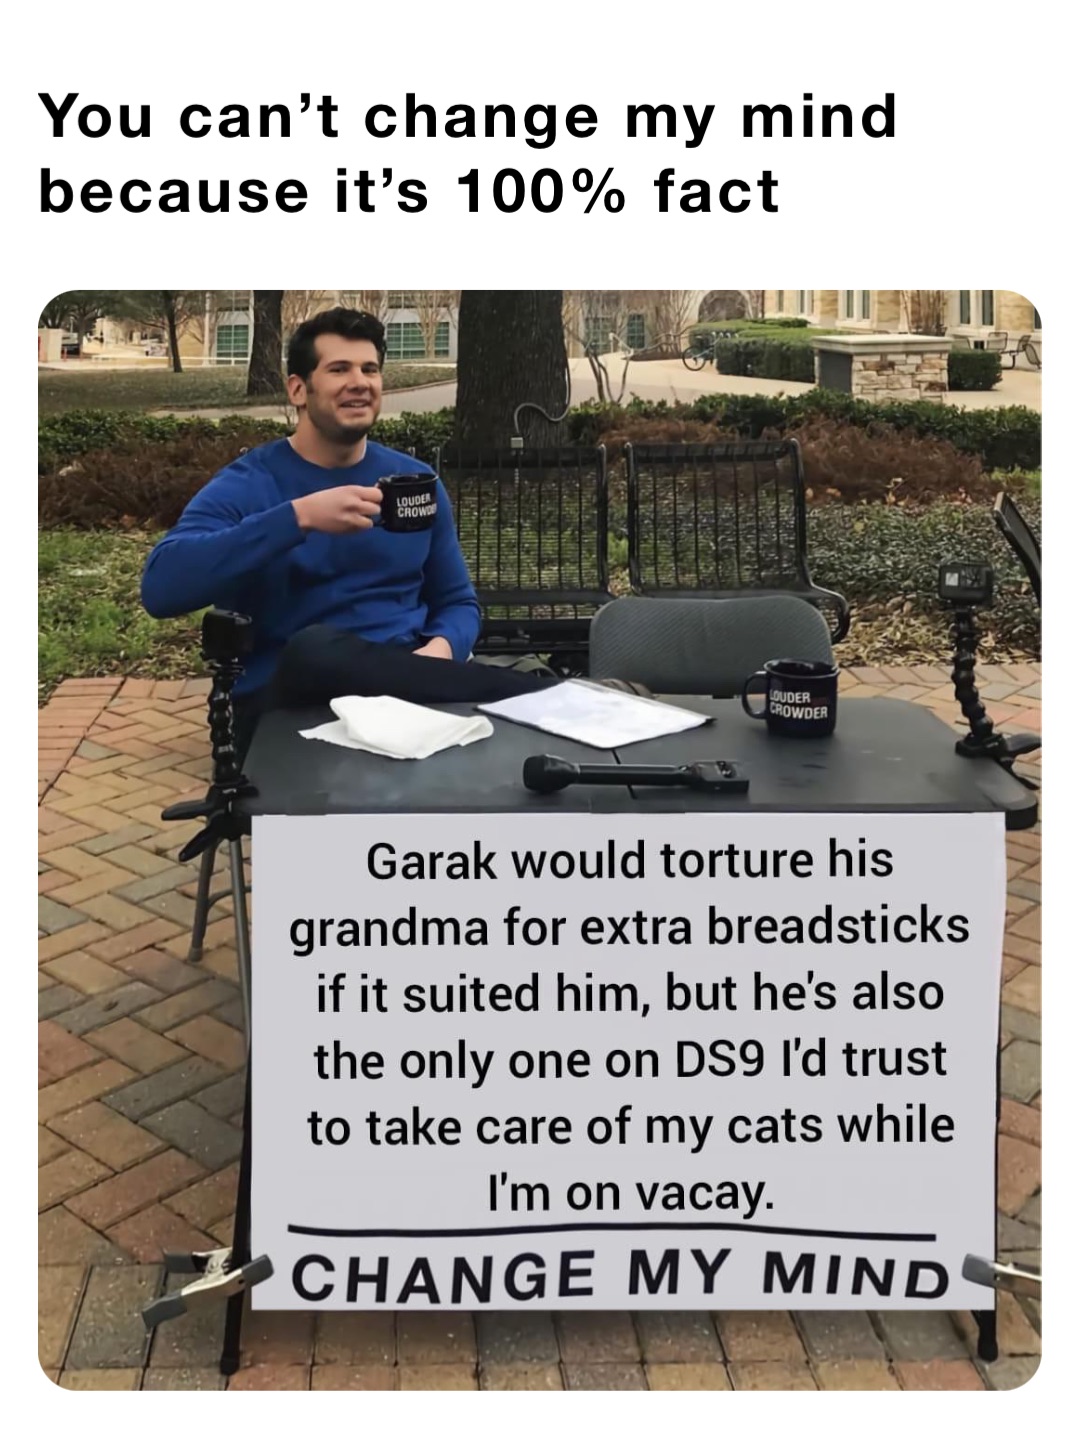 You can’t change my mind because it’s 100% fact